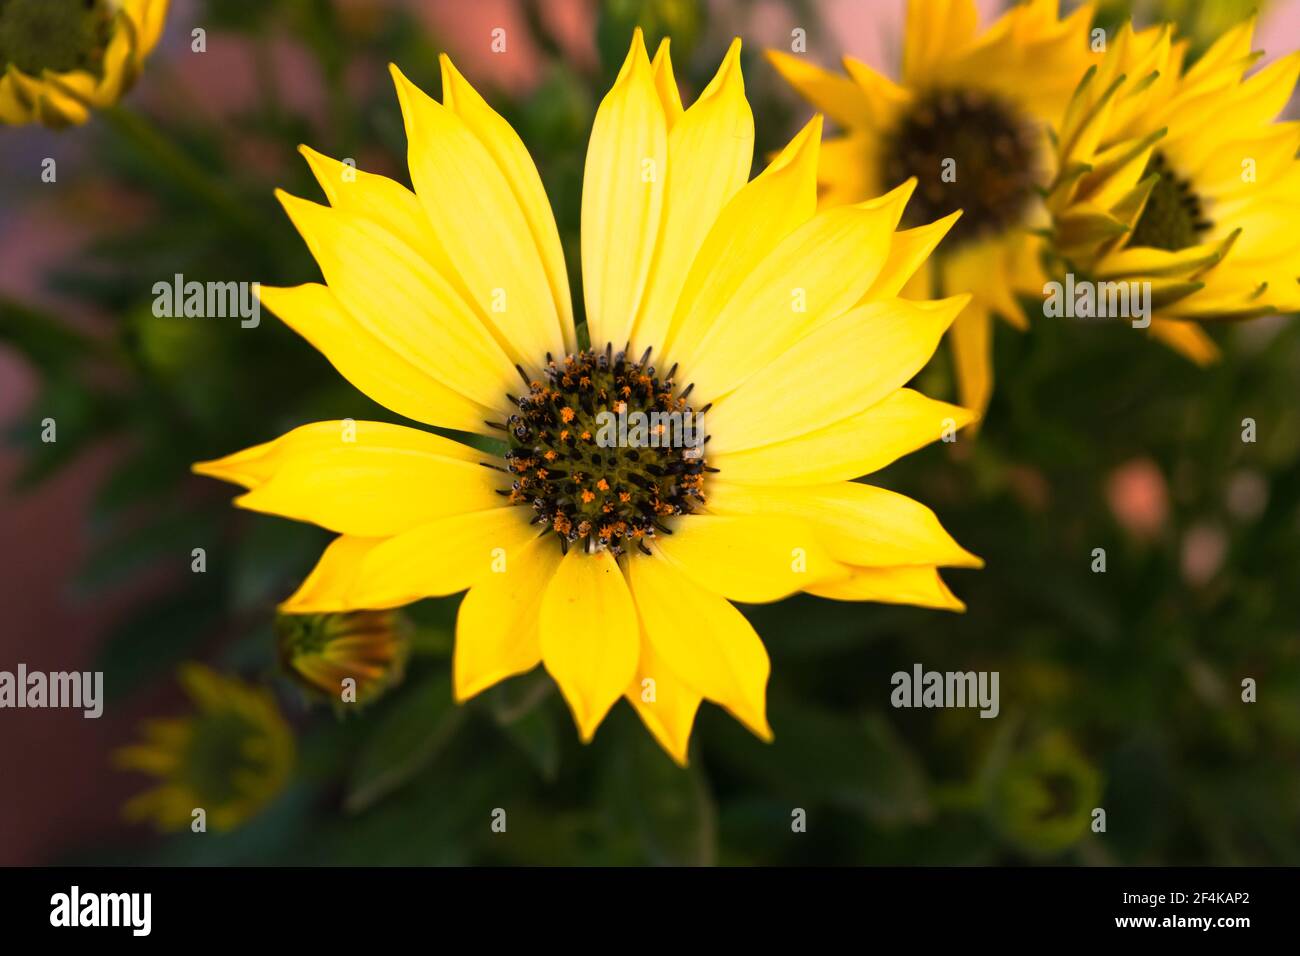 Close-up of a wonderful plant of helianthus debilis, with its characteristic colorful flowers. Stock Photo